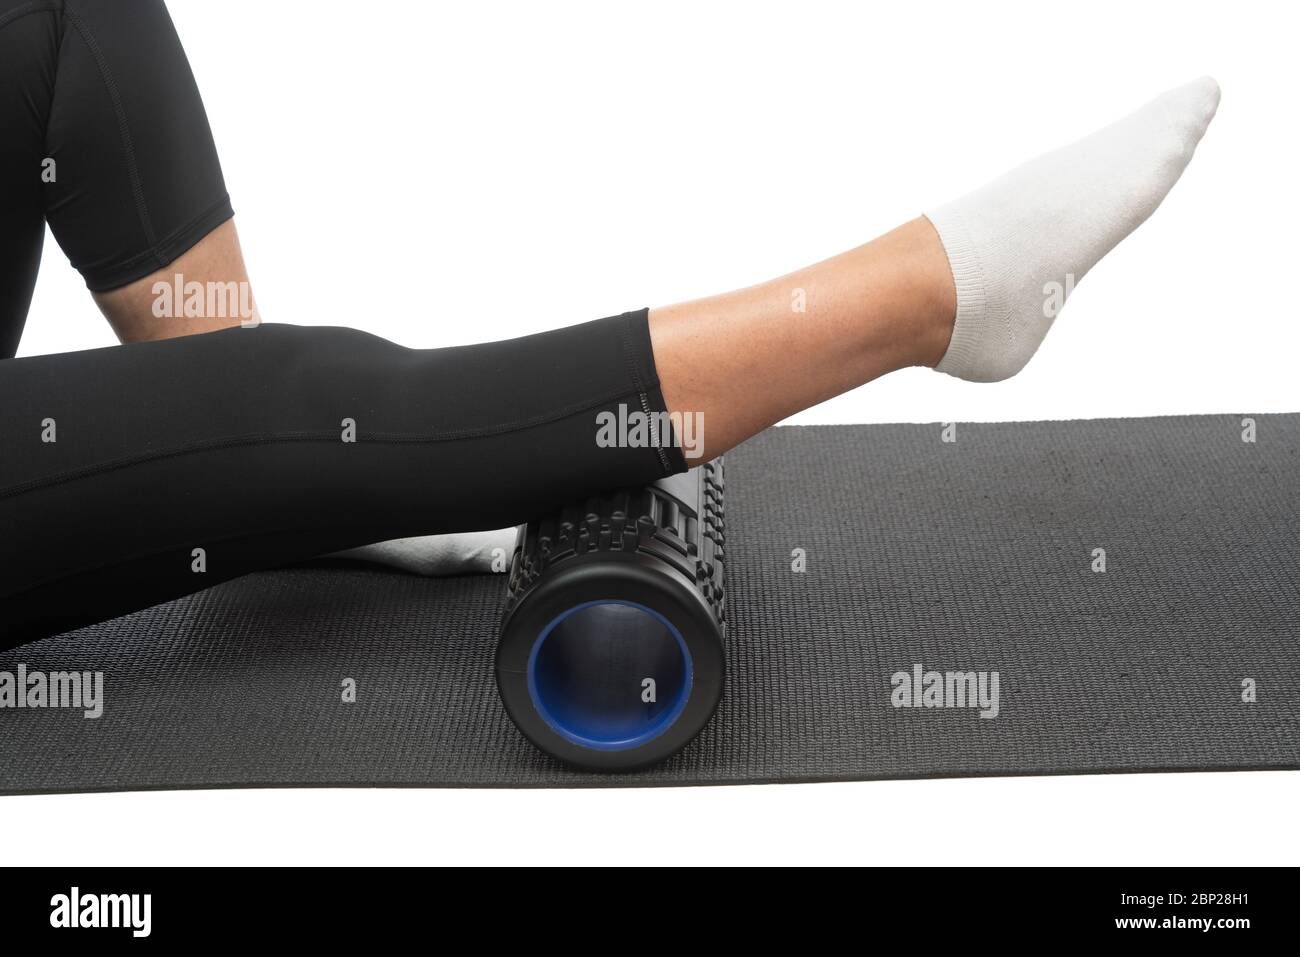 A middle-aged woman on a myofascial roller does a leg shin massage on a white background. Stock Photo